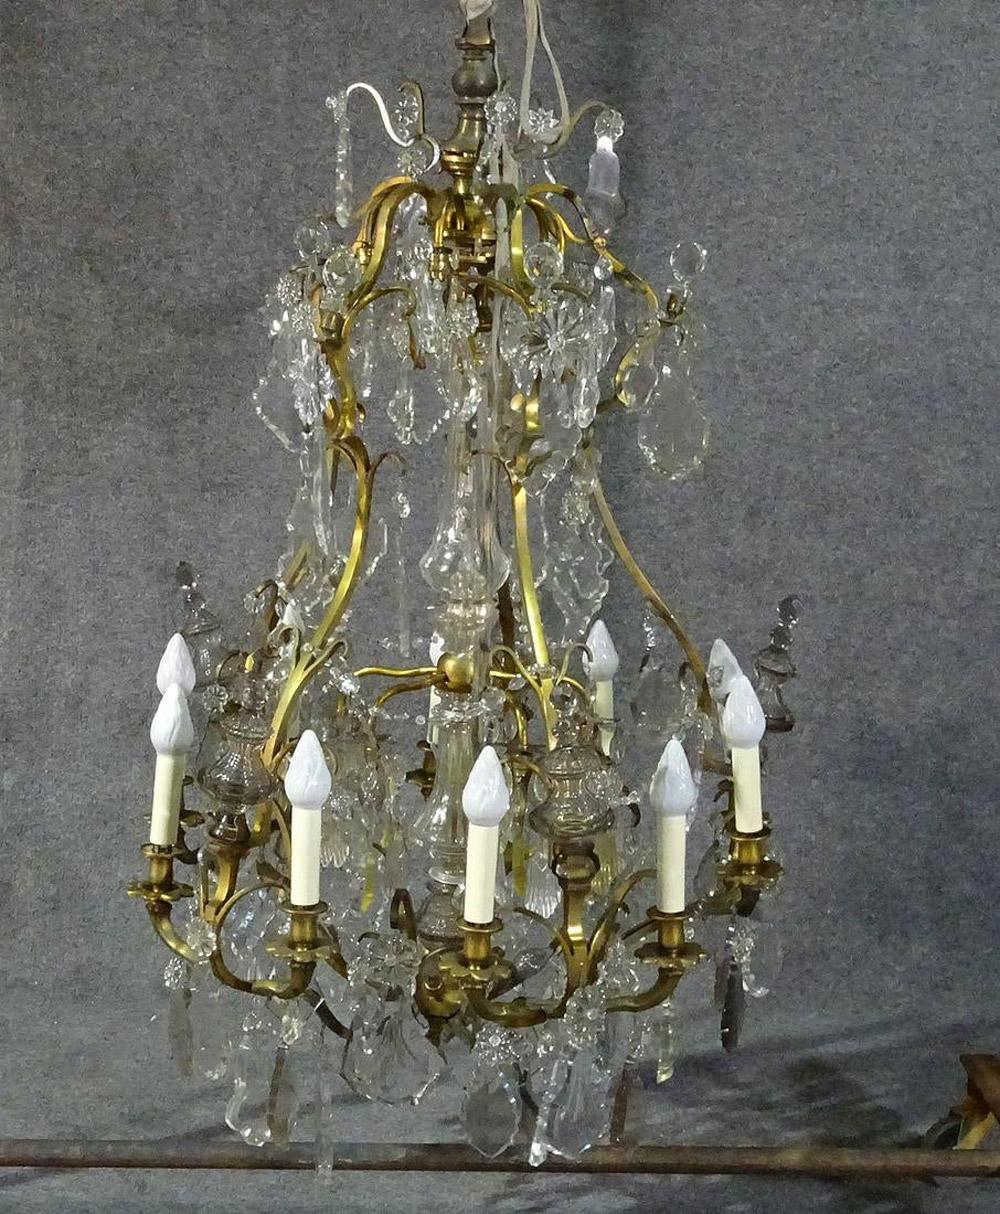 This is a nice chandelier that looks like a 90000.00 Baccarat crystal chandelier at a fair price. The chandelier does have some chips, missing prisms and very minor issues, but is essentially still very pretty and prisms can be replaced of course.